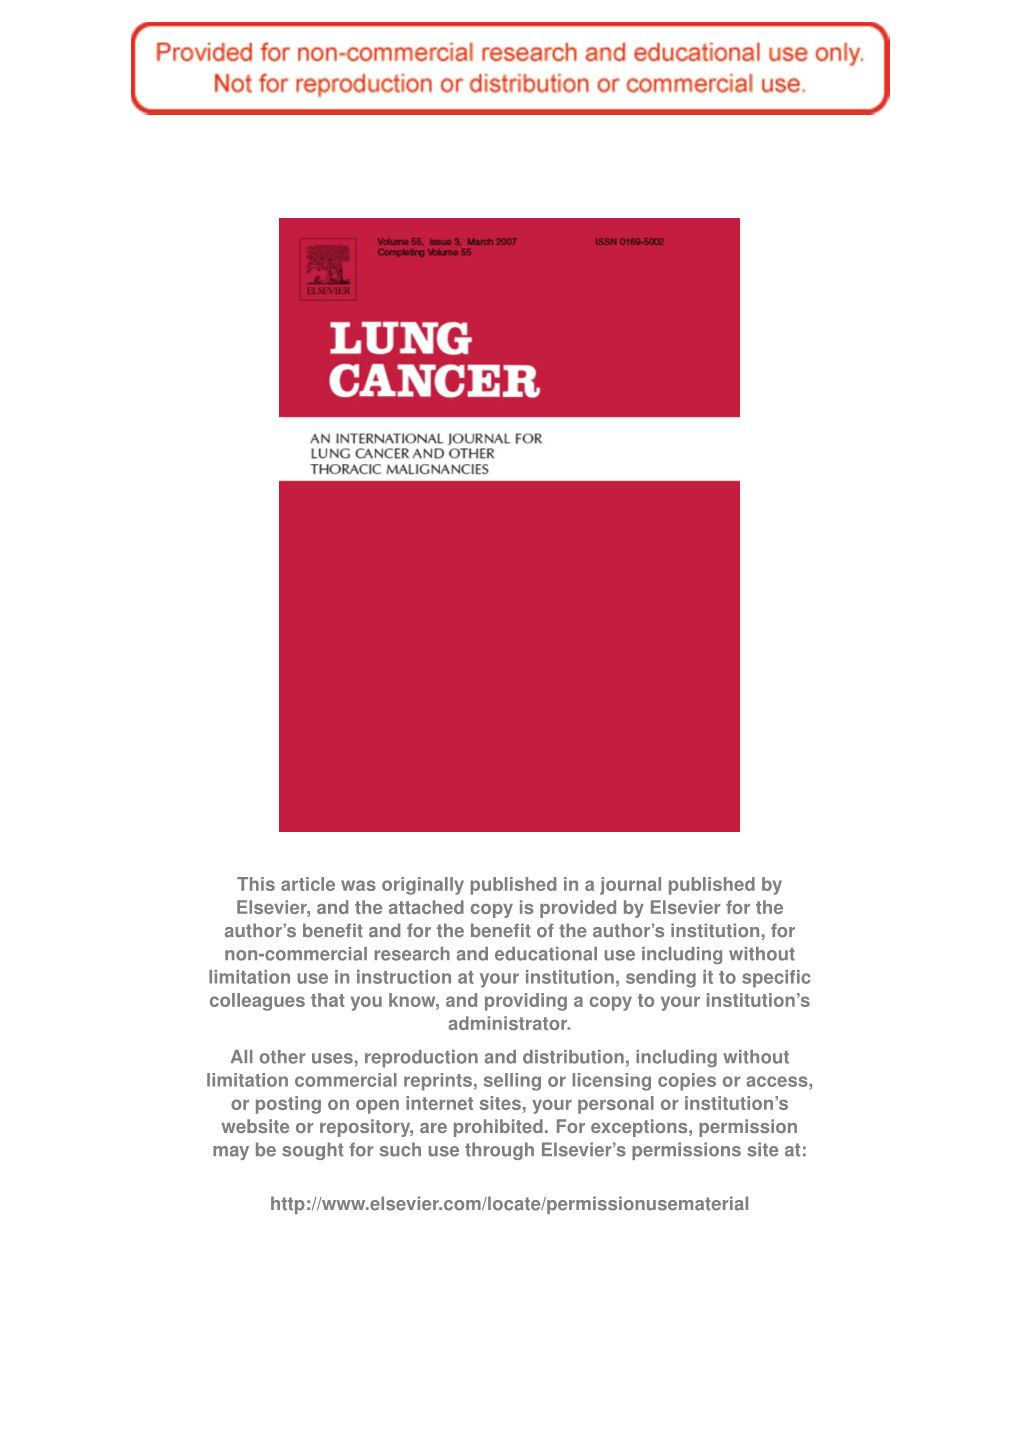 93-Ethnic Differences in Frequencies of Gene Lung Cancer.Pdf